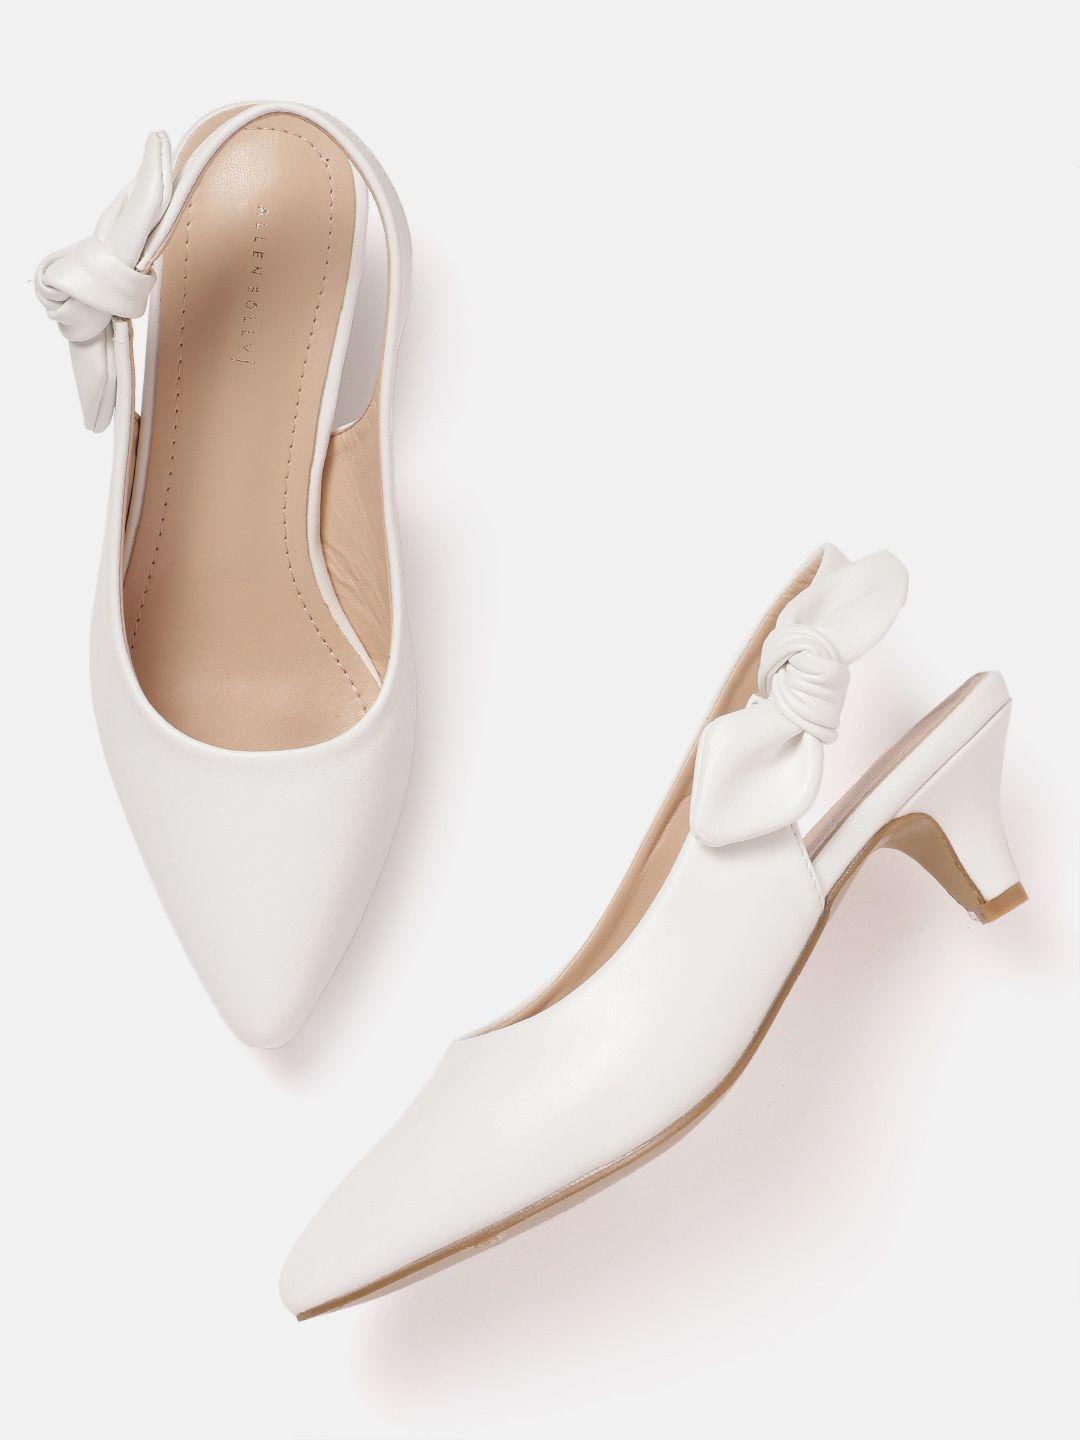 allen solly women pumps with bow detail